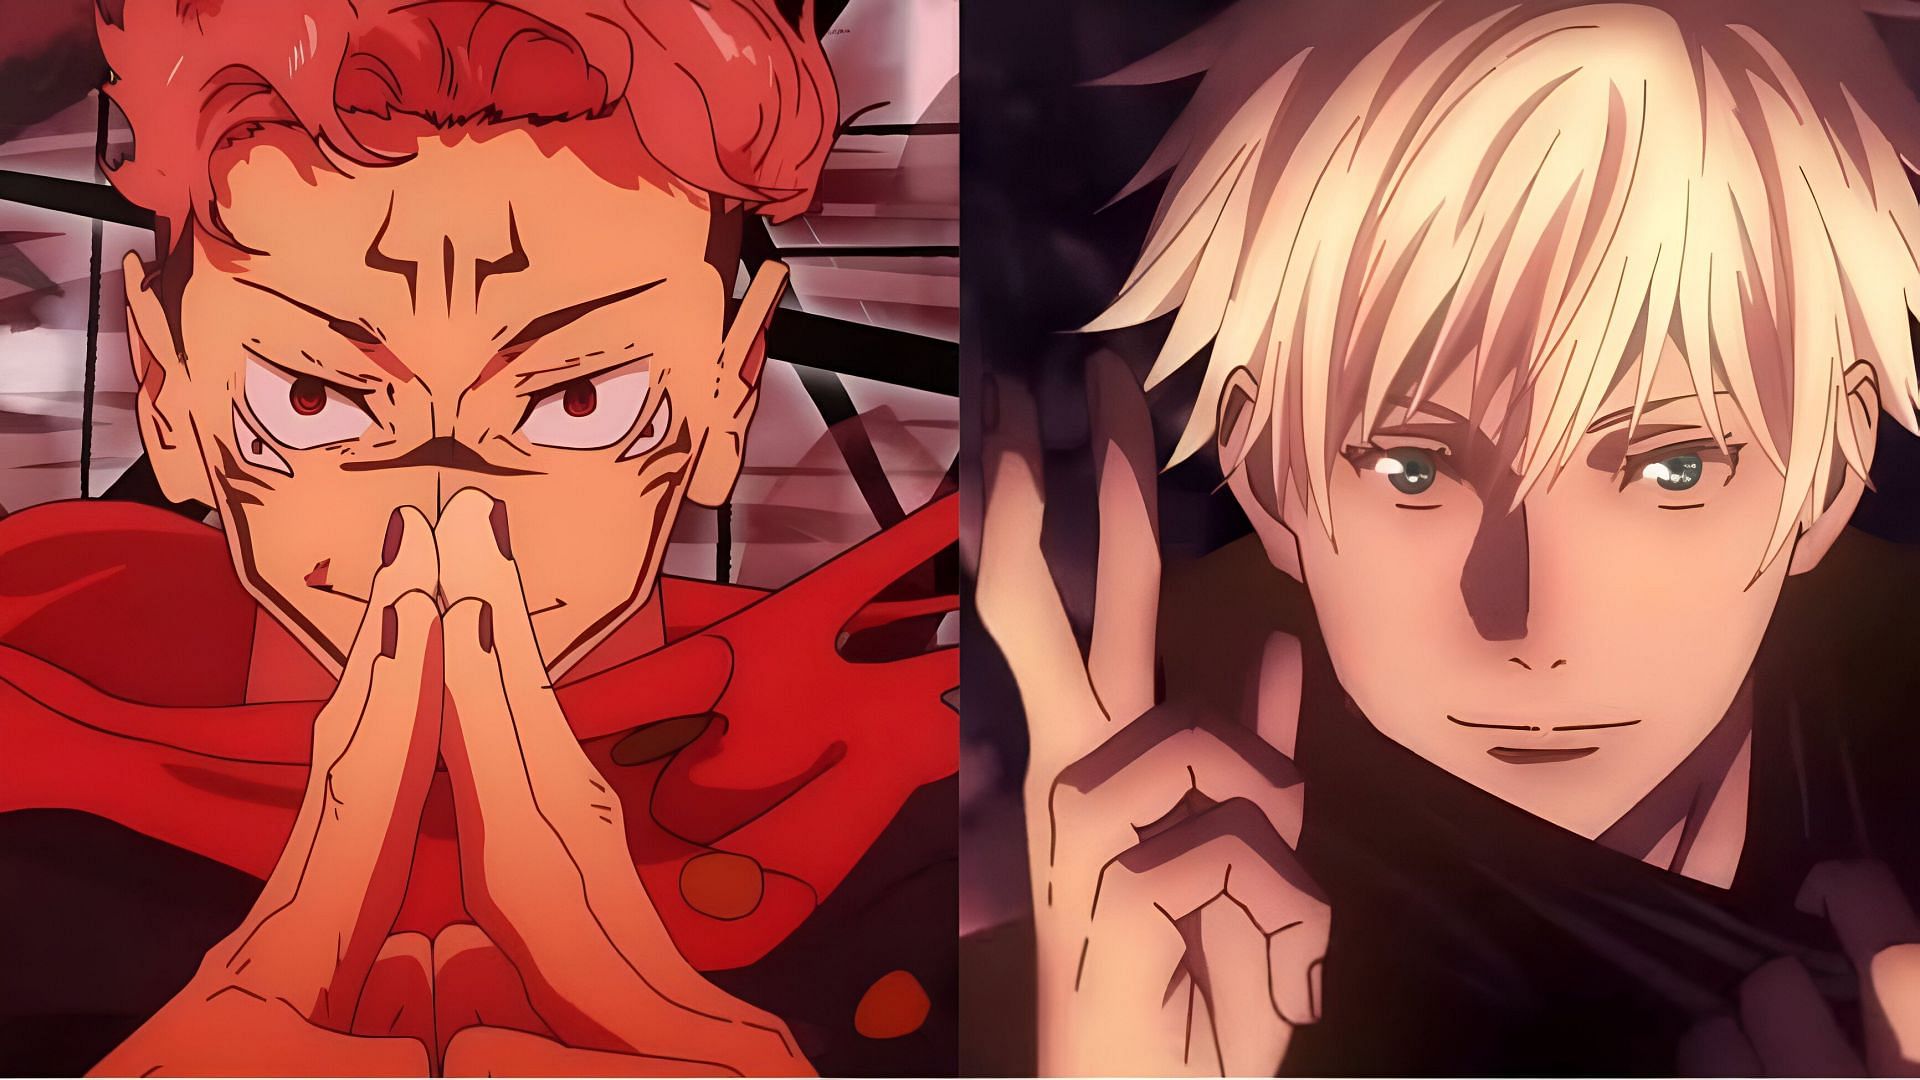 Sukuna (left) and Gojo (right) as seen in the anime (Image via MAPPA)